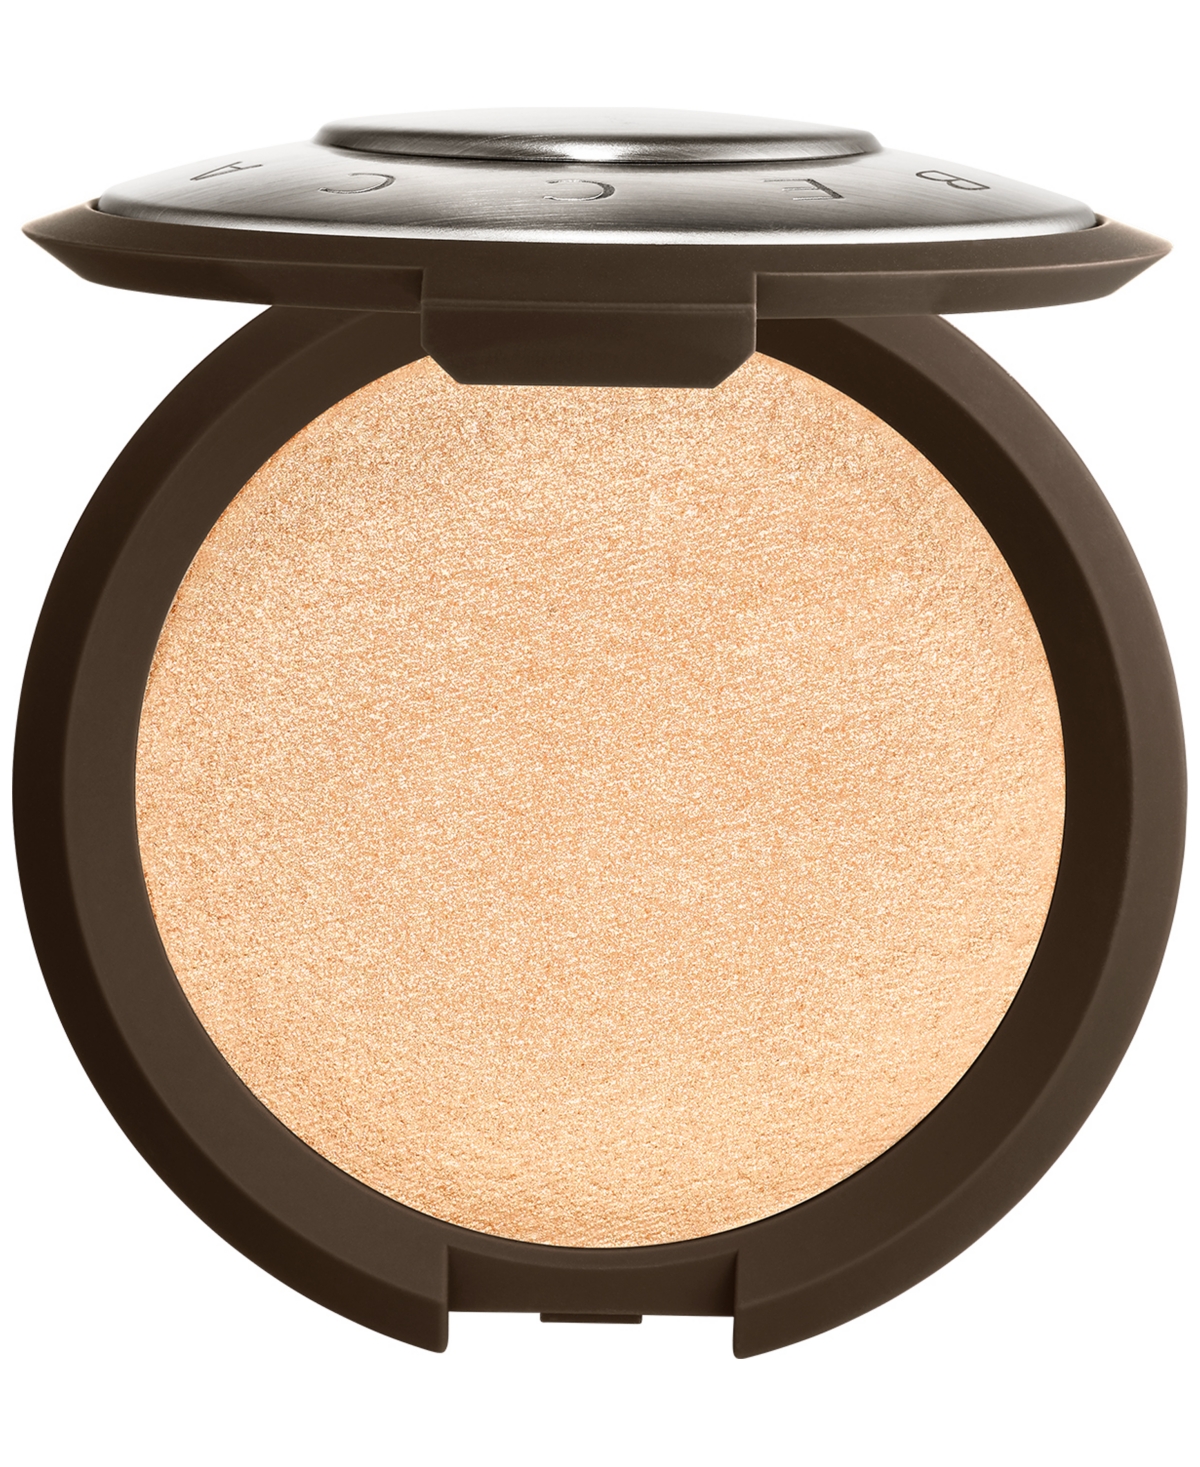 Smashbox Becca Shimmering Skin Perfector Pressed Highlighter In Moonstone (a Pale,incandescent Gold)